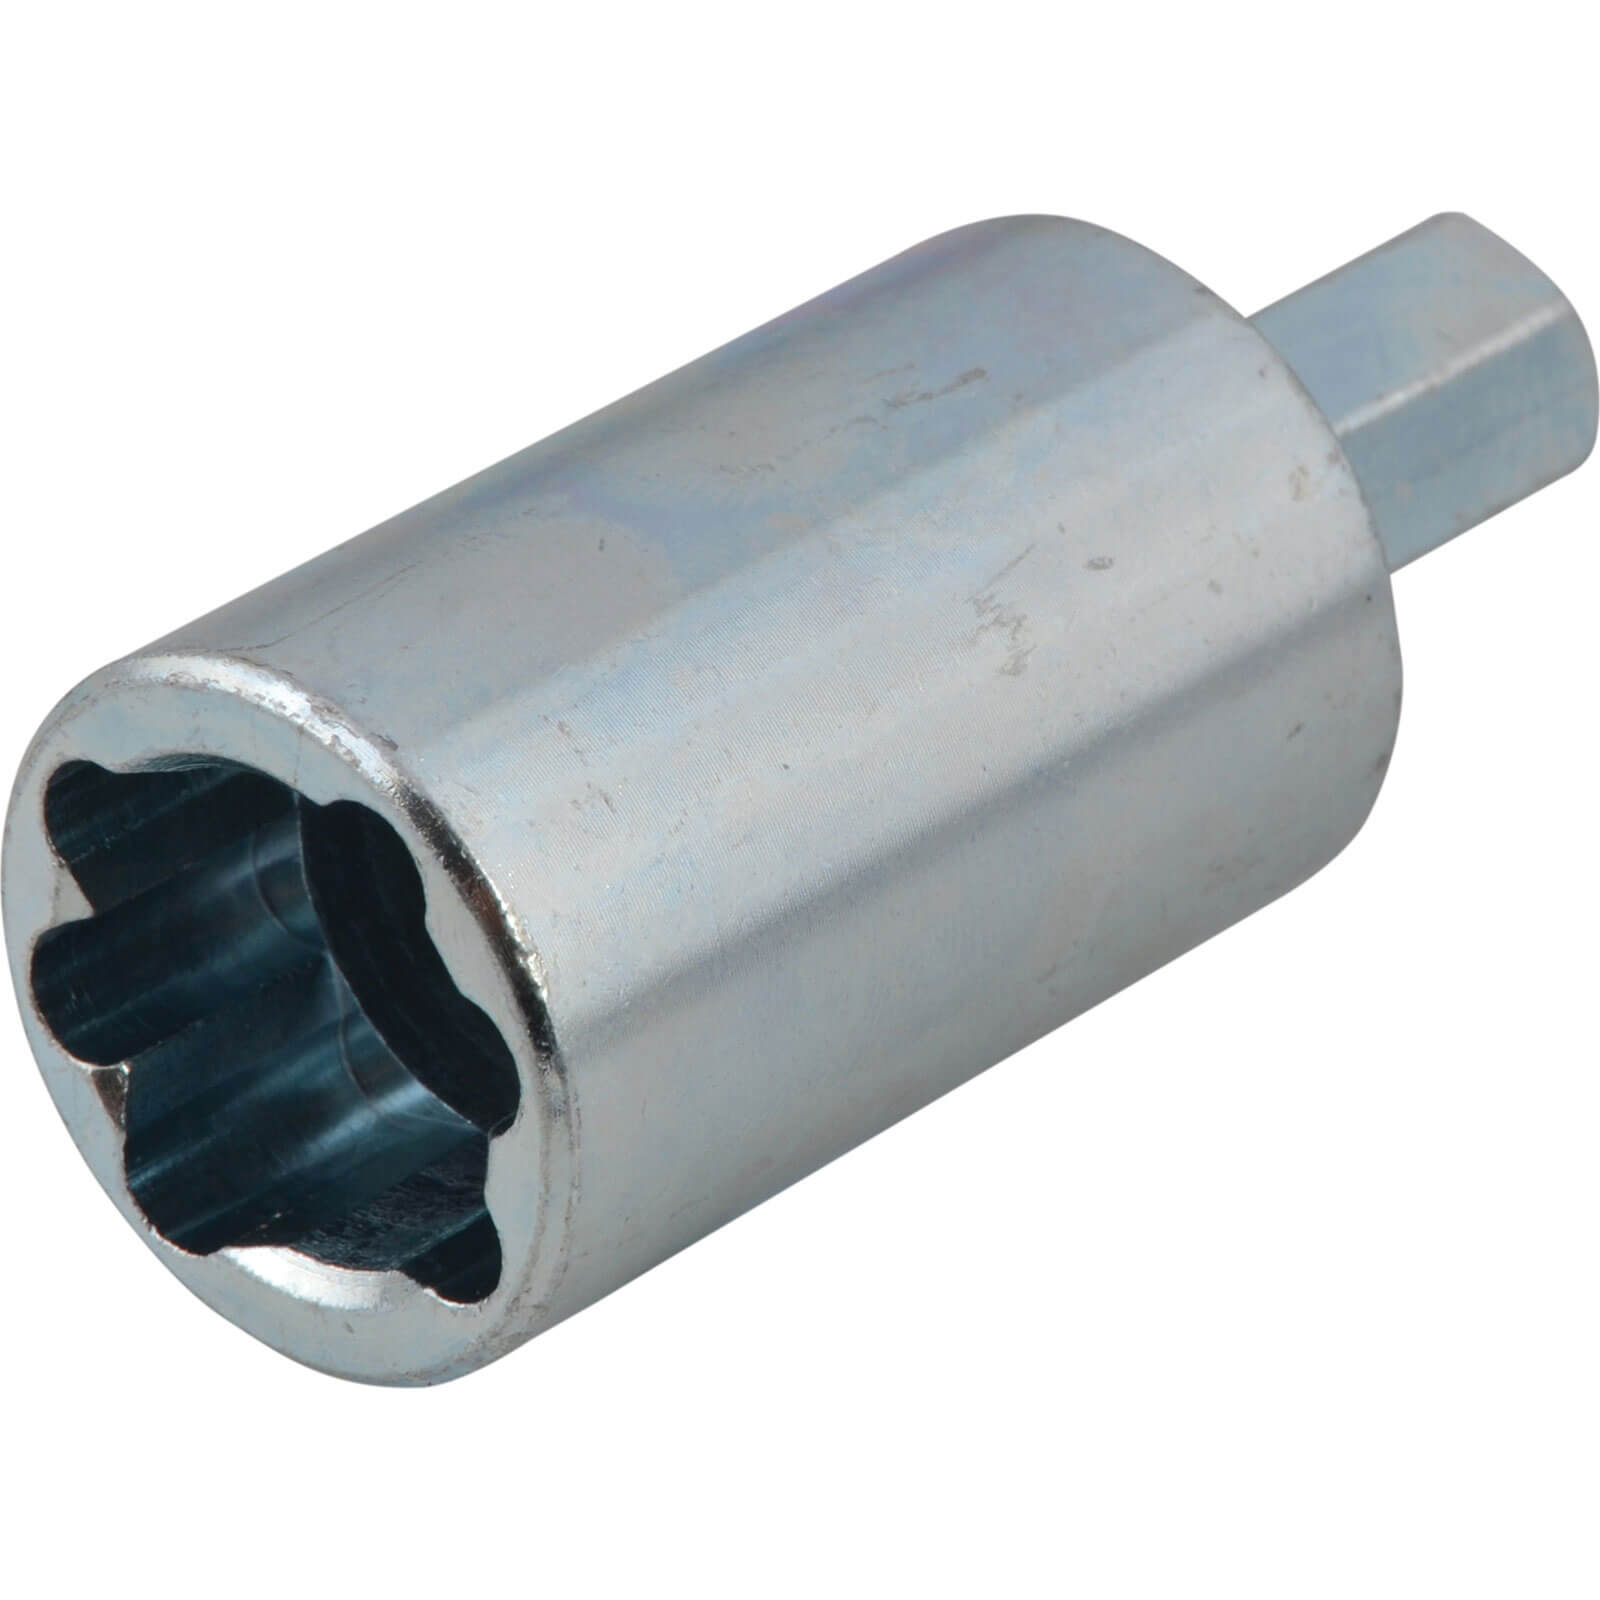 Photo of Monument Tail Driver Fitting Socket Tool